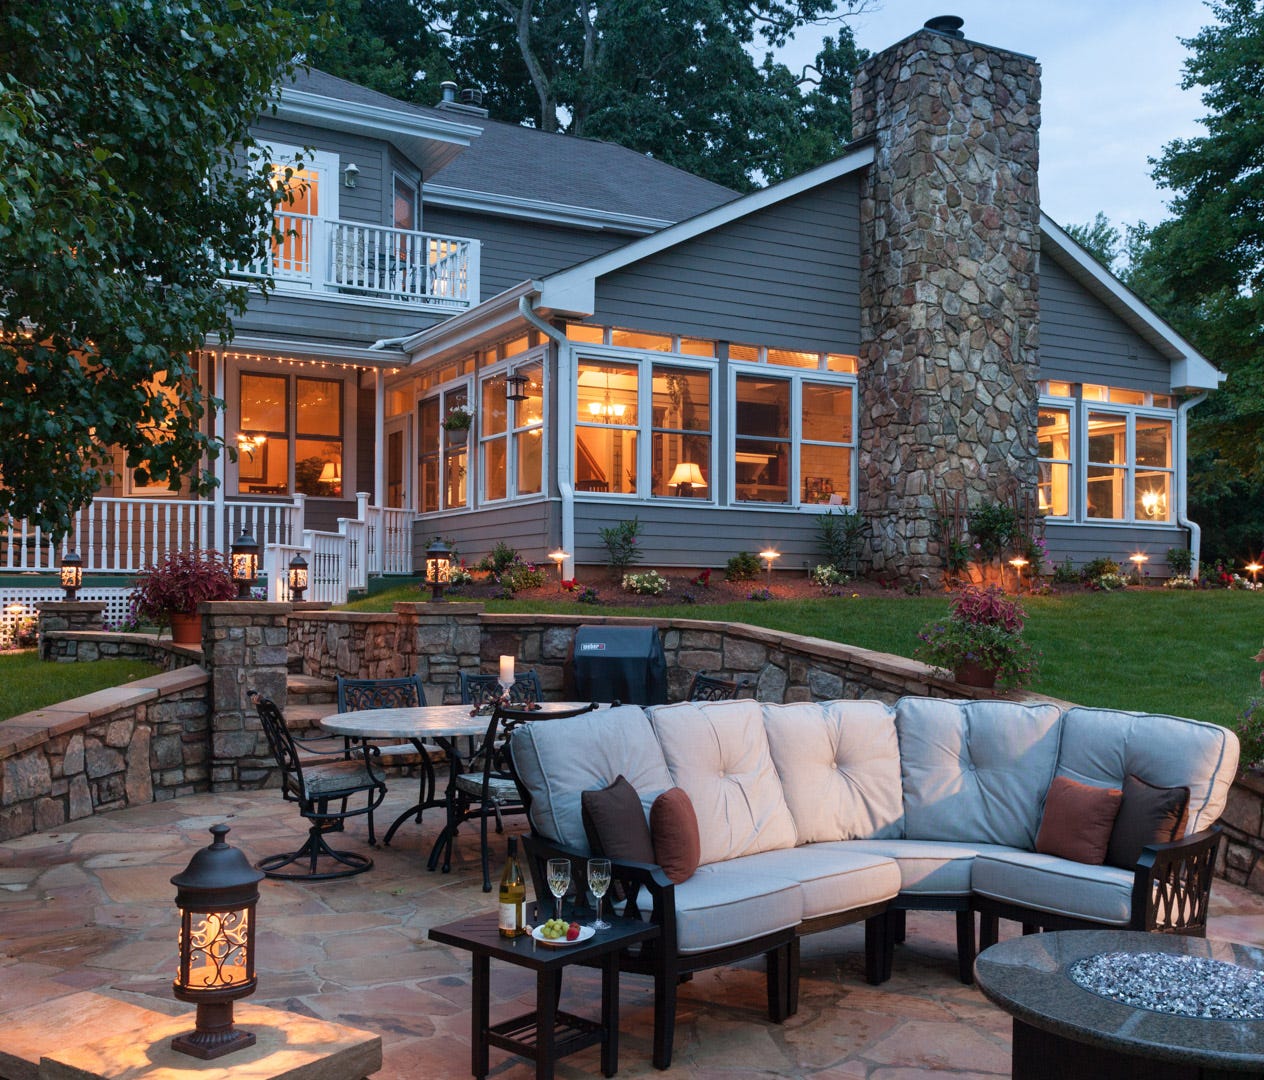 North Carolina: Andon-Reid Bed and Breakfast in Waynesville (Price: $178/night): One of the top 25 B&Bs in the country according to Trip Advisor, this mountain hamlet facility is a fan favorite.